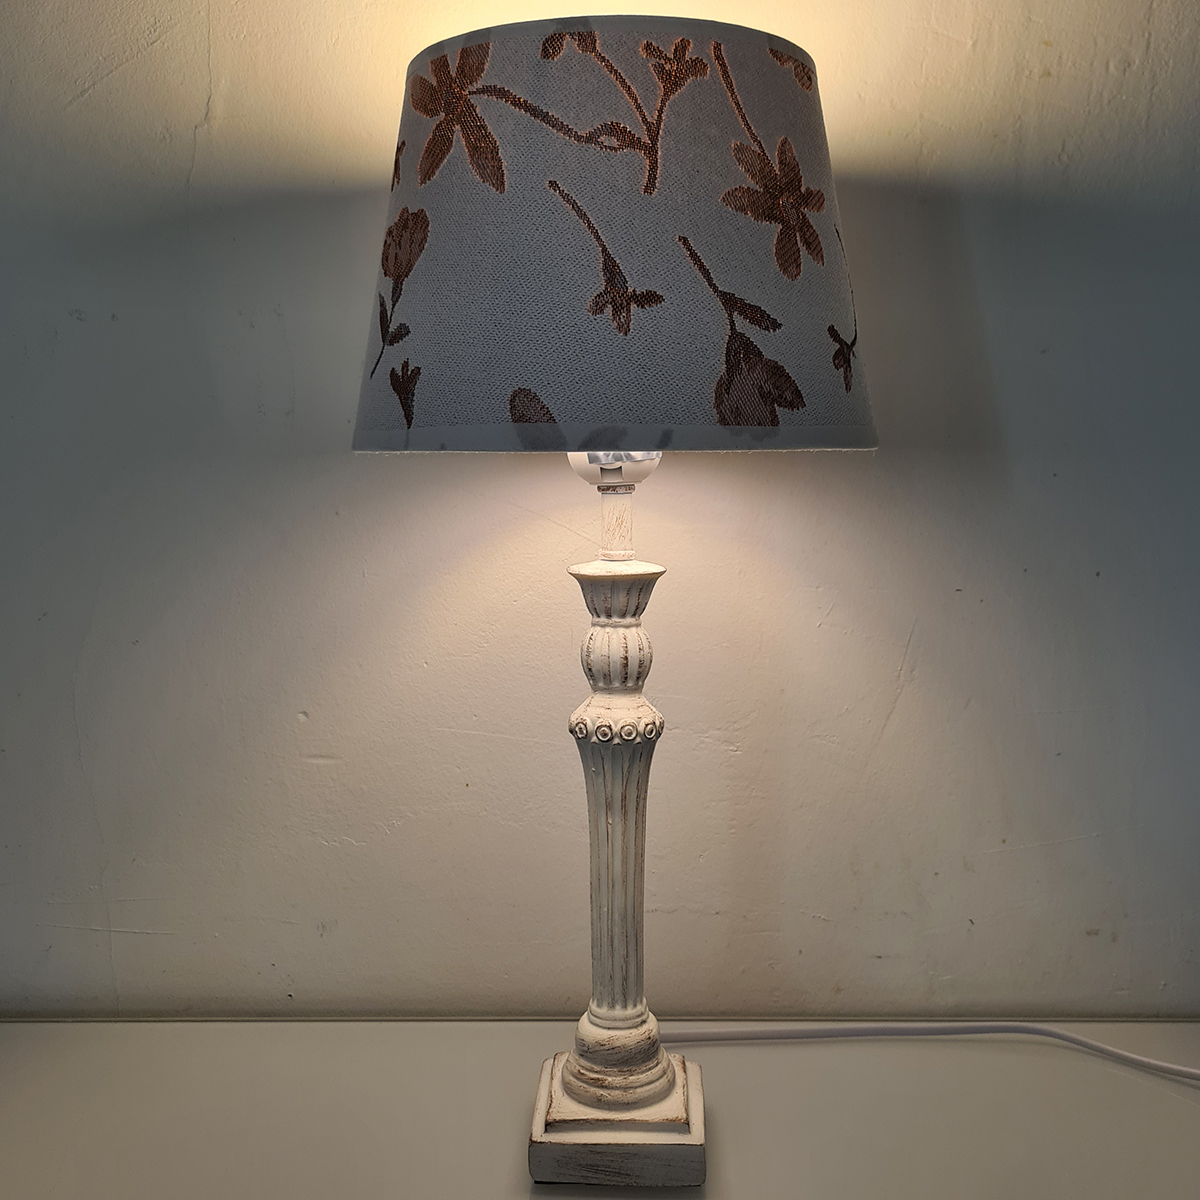 White patinated foot table lamp 43 cm